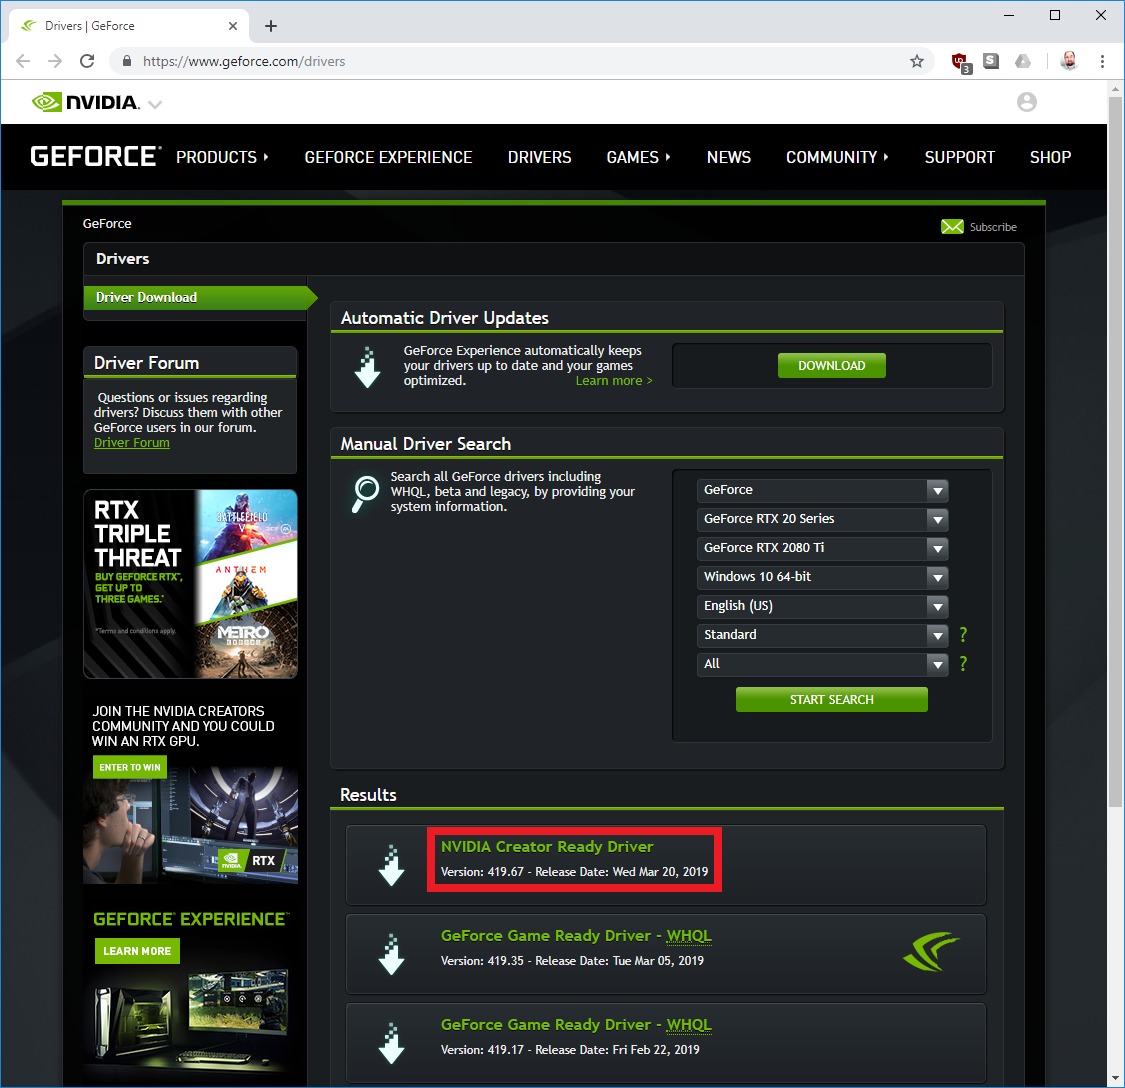 How to select NVIDIA Creator Ready Drivers for GeForce and Titan video cards on geforce.com